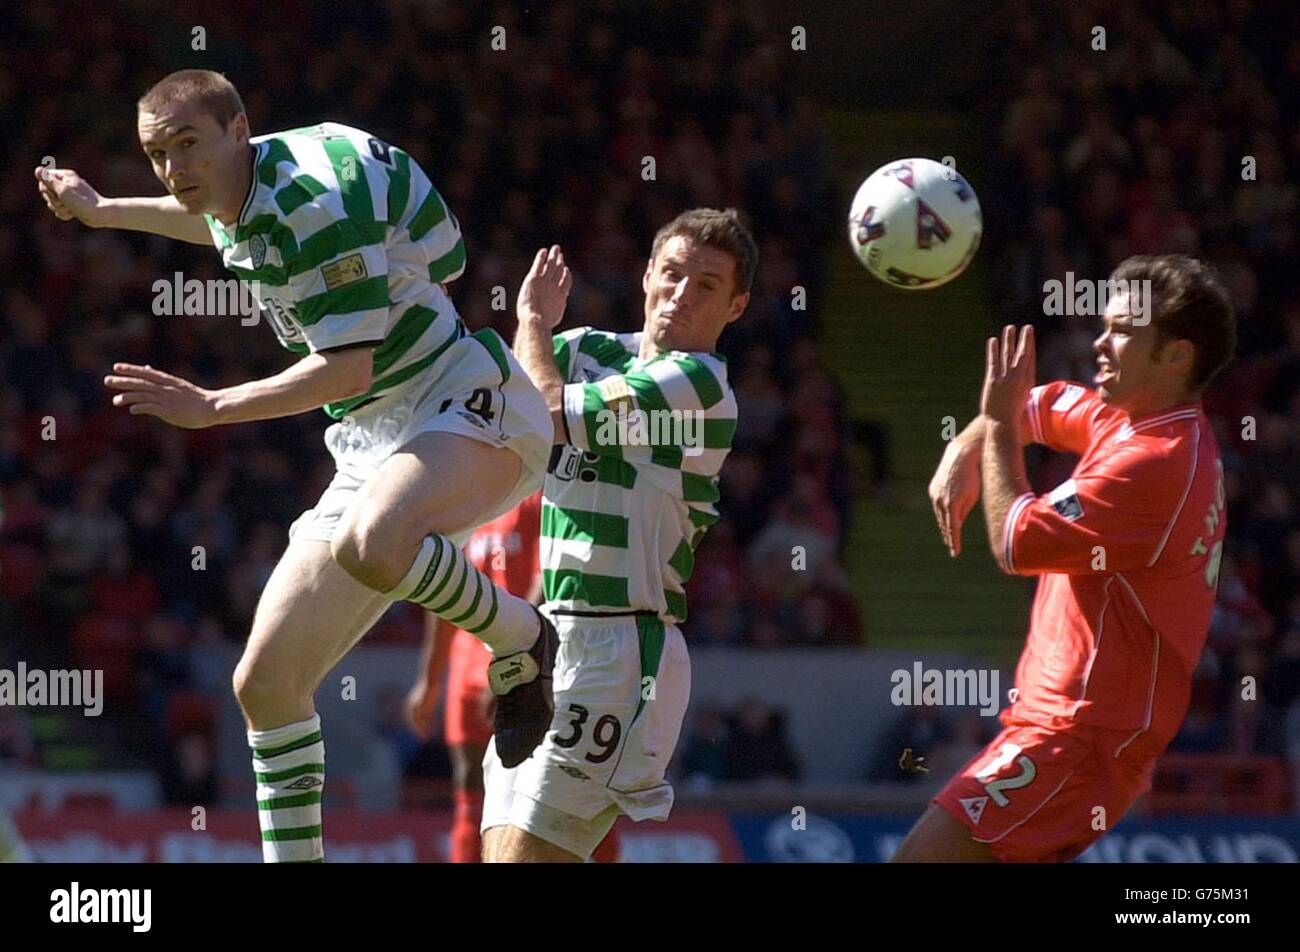 Celtic's Colin Healy (left) heads the ball past teammate Jamie Smith during the match in the Bank of Scotland Scottish Premier League at Aberdeen's Pittodrie stadium. Stock Photo